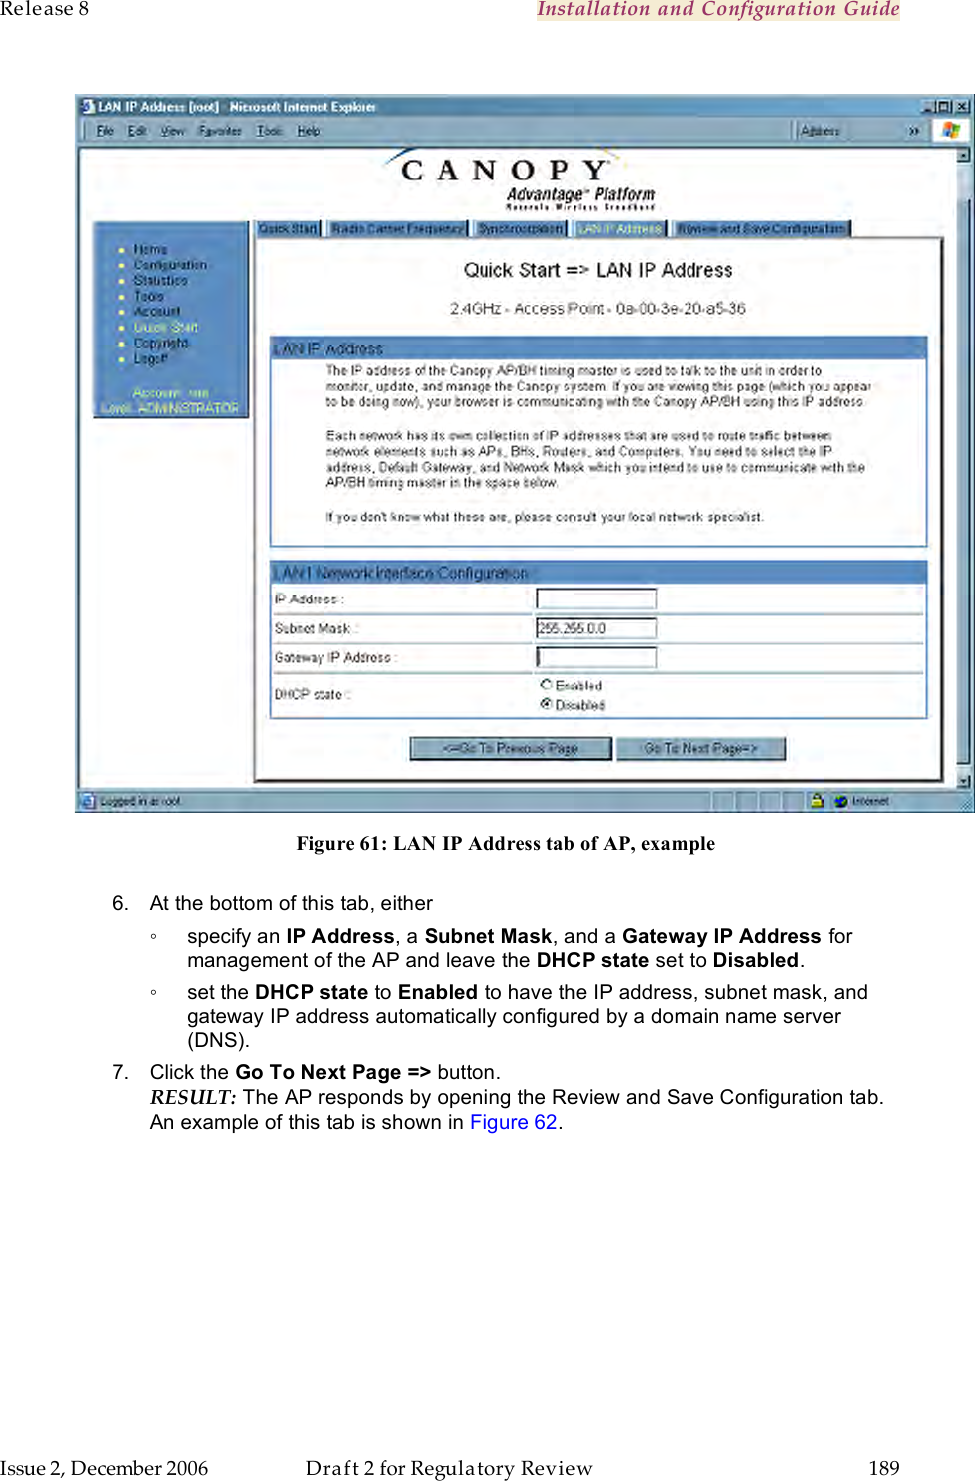 Release 8    Installation and Configuration Guide   Issue 2, December 2006  Draft 2 for Regulatory Review  189       Figure 61: LAN IP Address tab of AP, example  6.  At the bottom of this tab, either ◦  specify an IP Address, a Subnet Mask, and a Gateway IP Address for management of the AP and leave the DHCP state set to Disabled. ◦  set the DHCP state to Enabled to have the IP address, subnet mask, and gateway IP address automatically configured by a domain name server (DNS). 7.  Click the Go To Next Page =&gt; button. RESULT: The AP responds by opening the Review and Save Configuration tab. An example of this tab is shown in Figure 62. 